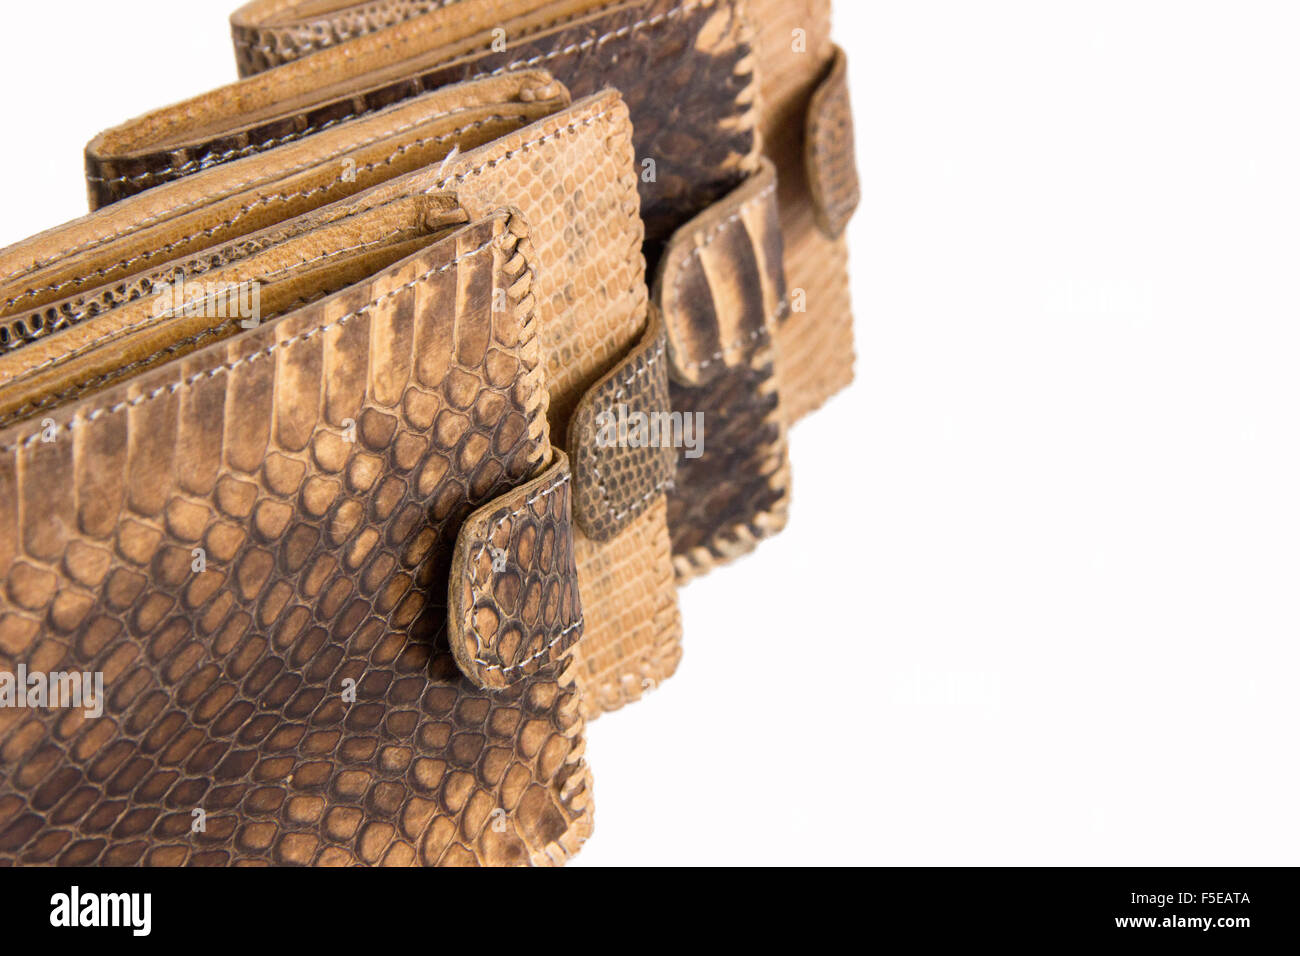 Several brown purse made of snake skin on a white background Stock Photo